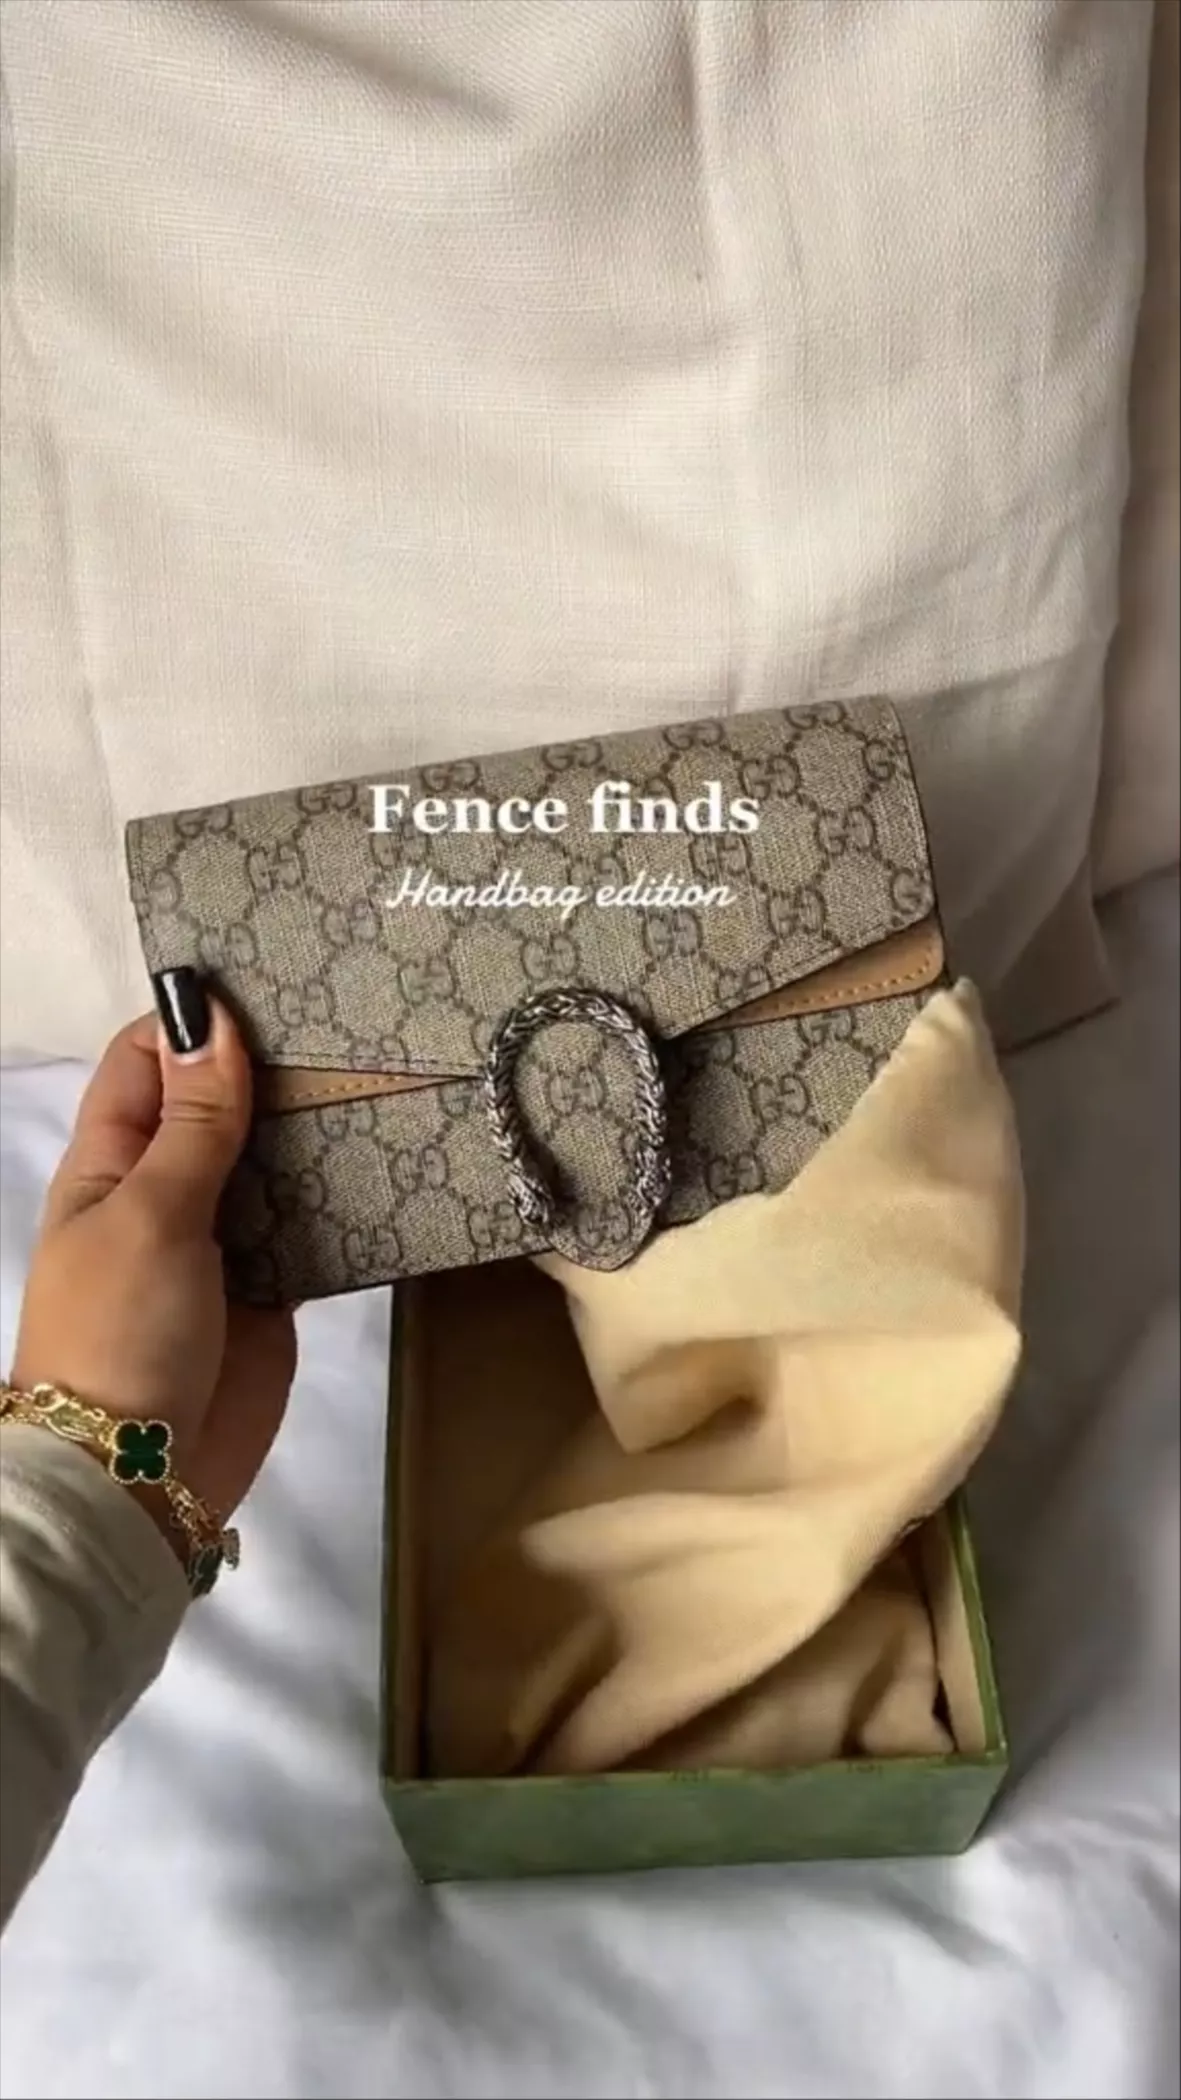 Part 1  DHG8 Finds, Pochette Metis 🥰#thefence #thefencefinds